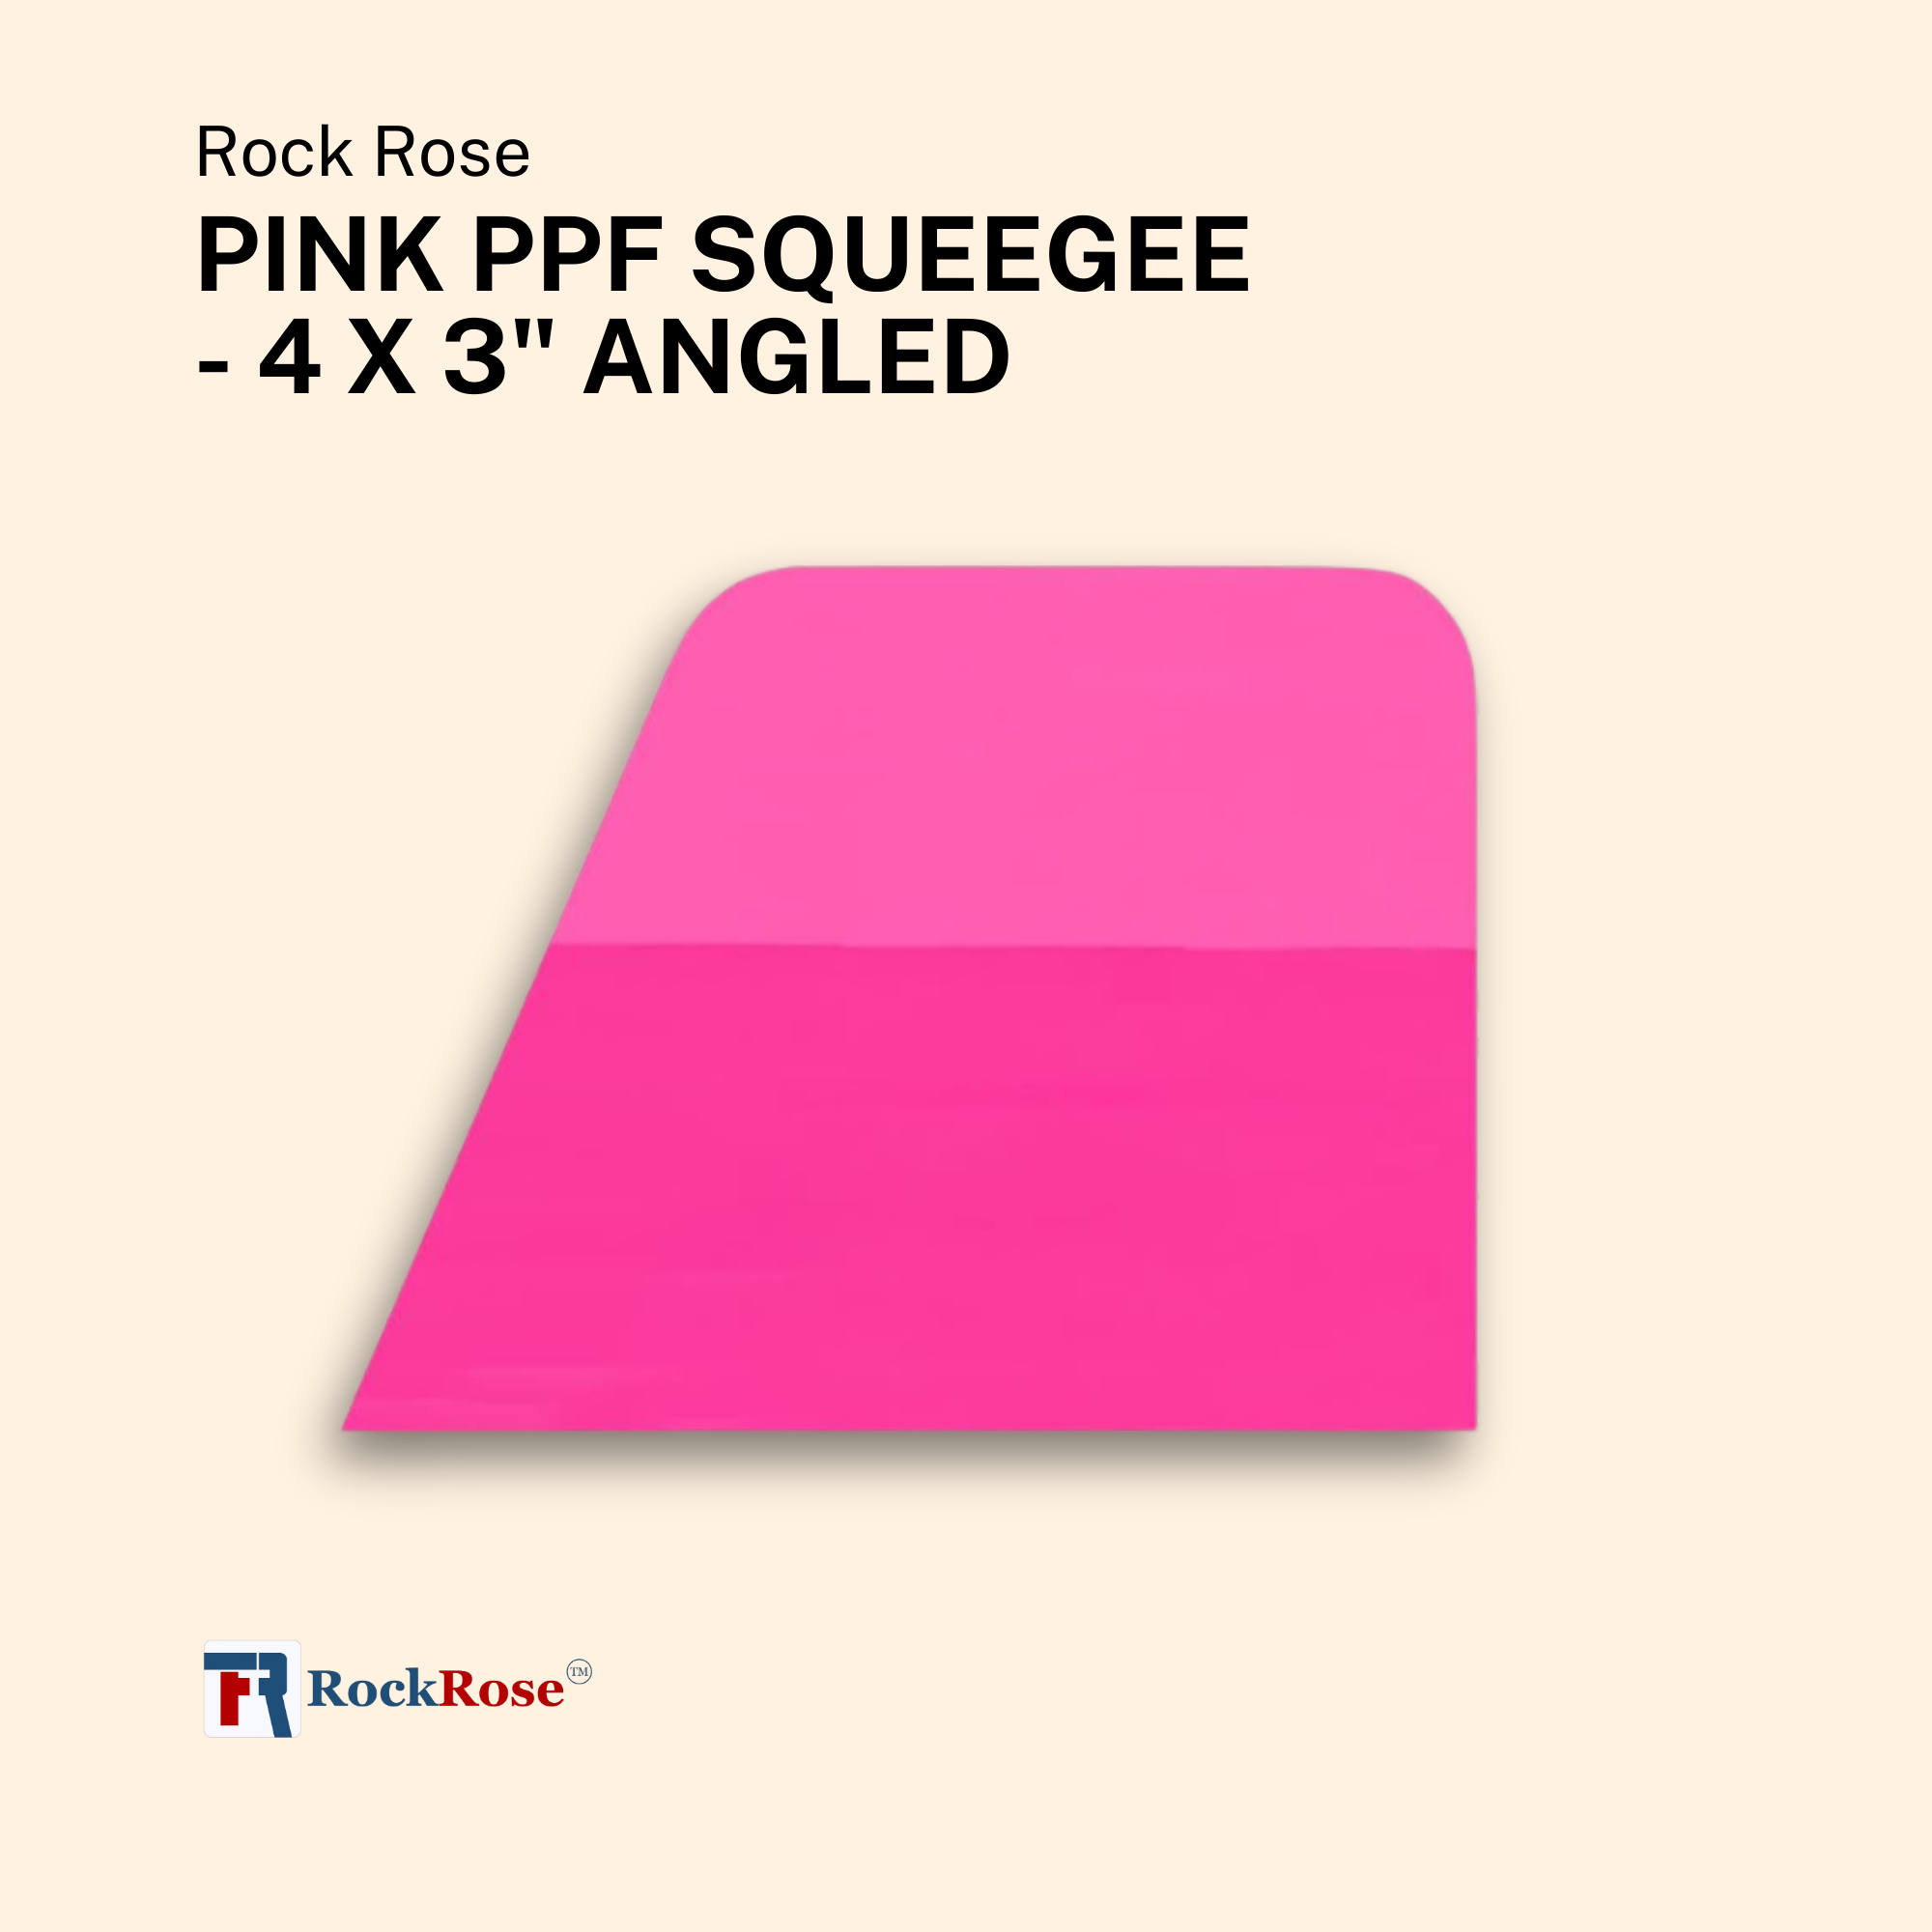 Pink PPF Squeegee - 1x3 with rounded corner